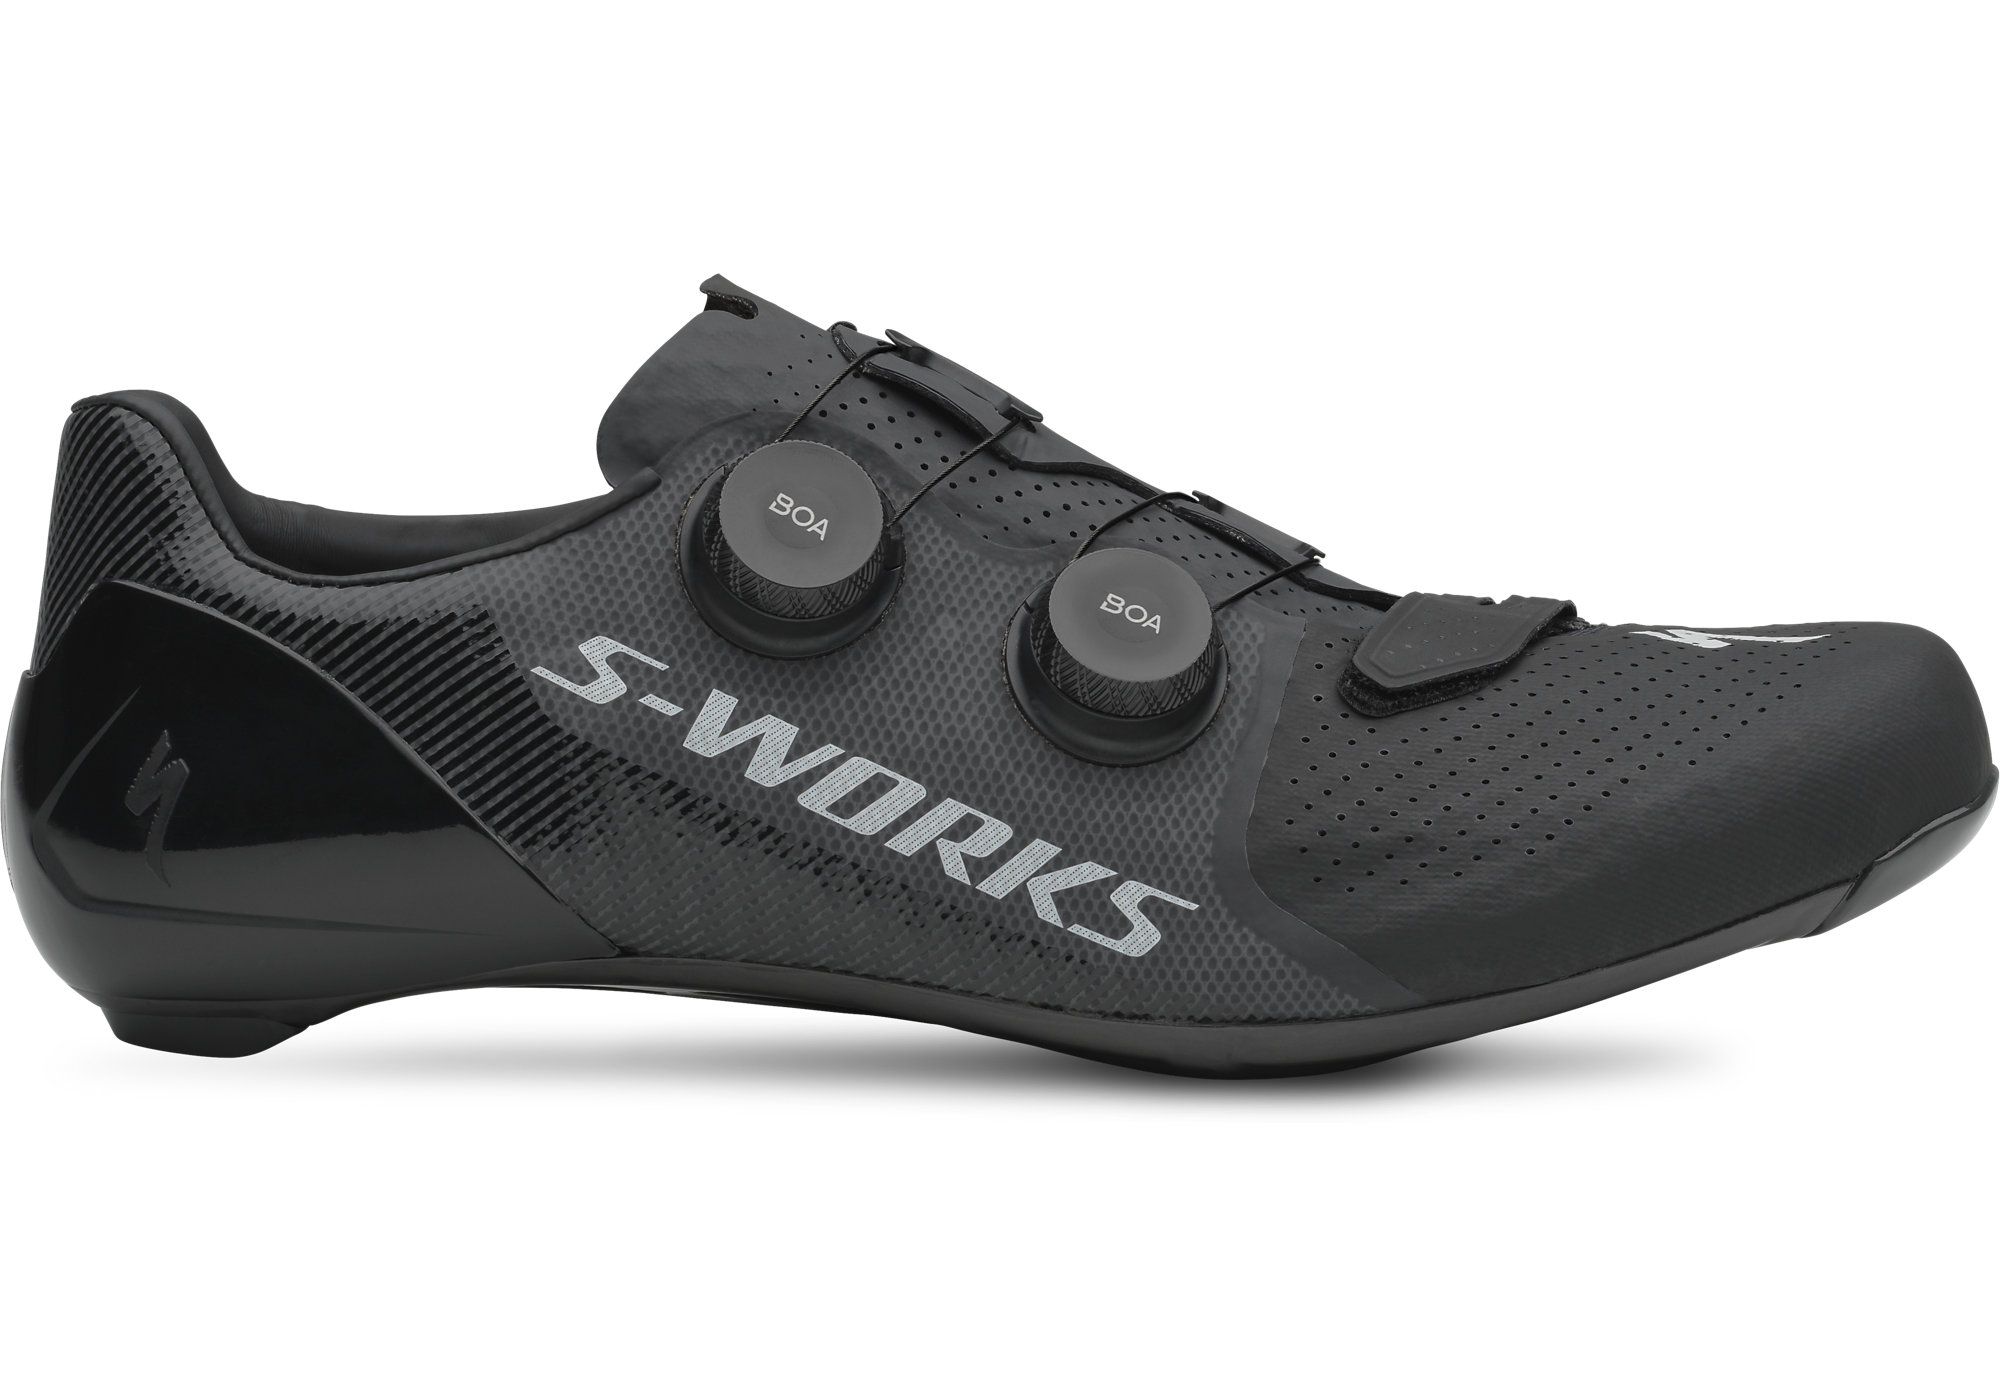 S-Works 7 Road Shoes Wide